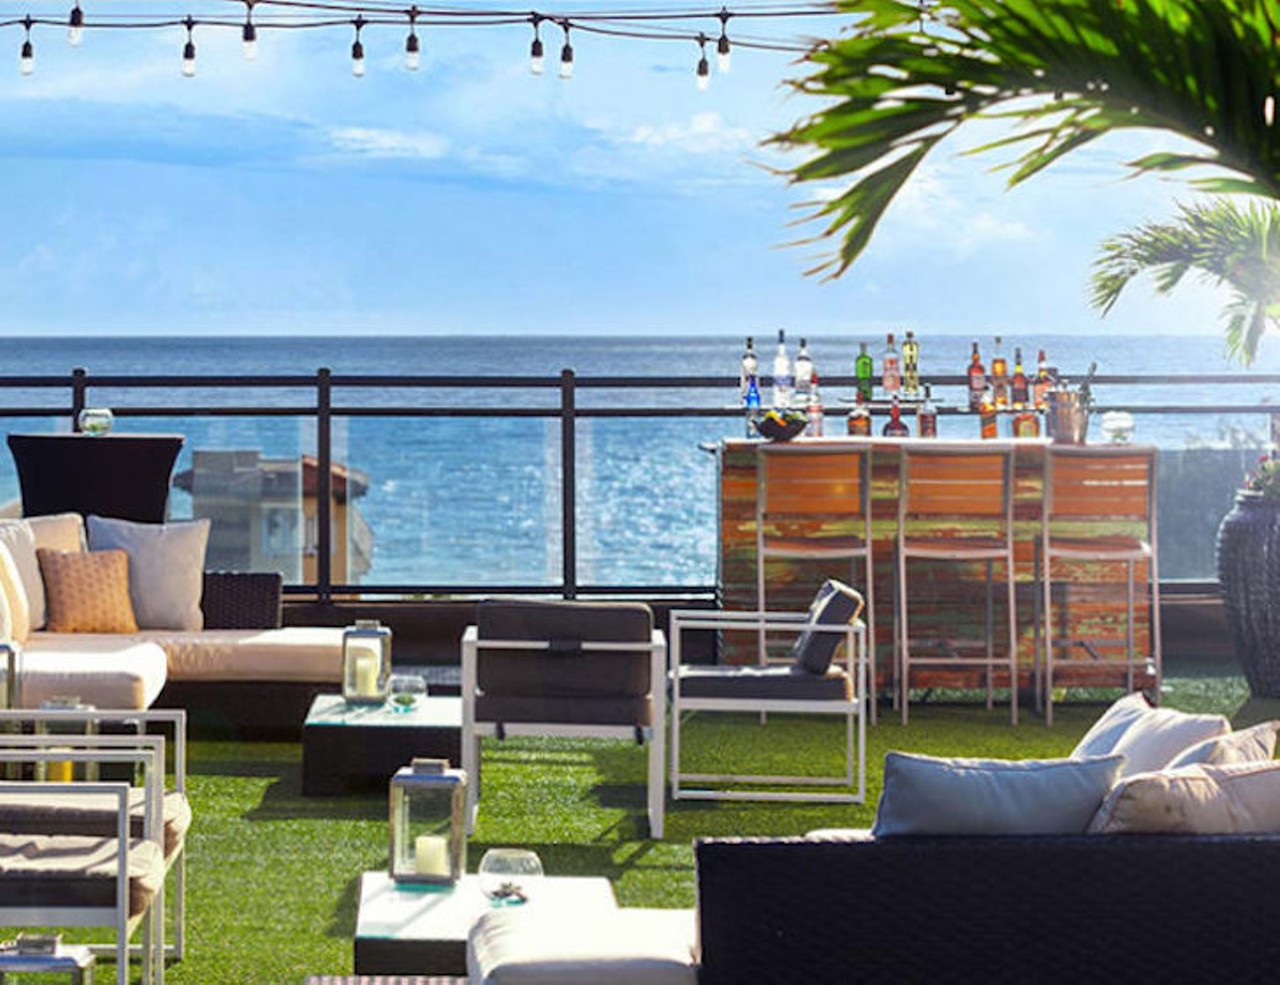 360 Rooftop Bar at Hotel Zamora   
3701 Gulf Blvd., St. Pete Beach
Visitors can rent cabanas on the roof of the Spanish-inspired Hotel Zamora. The bar overlooks the intracoastal waterway and the happy hour runs nightly from 3 p.m.-7 p.m.
Photo via The Hotel Zamora&#146;s website